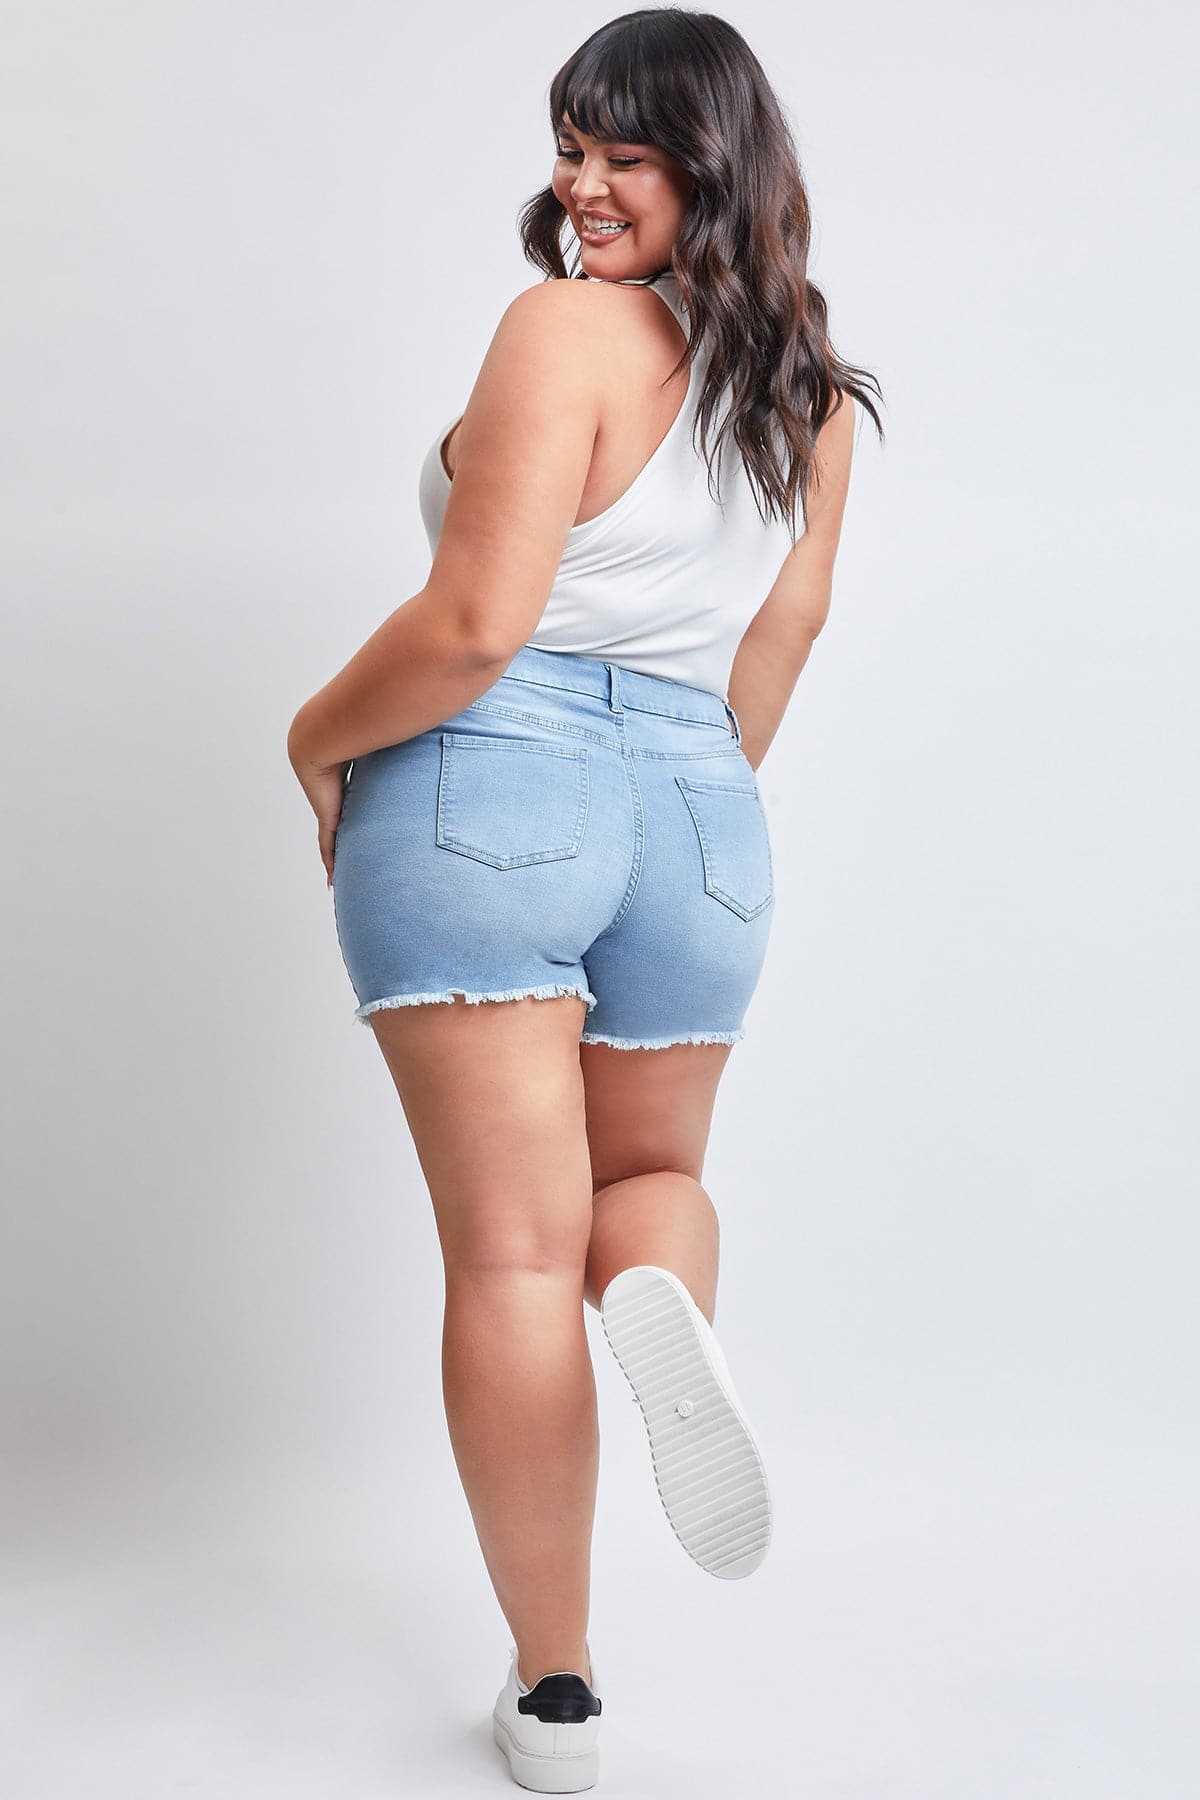 Plus Size Women's Curvy Fit  Jeans Shorts With Fray Hem